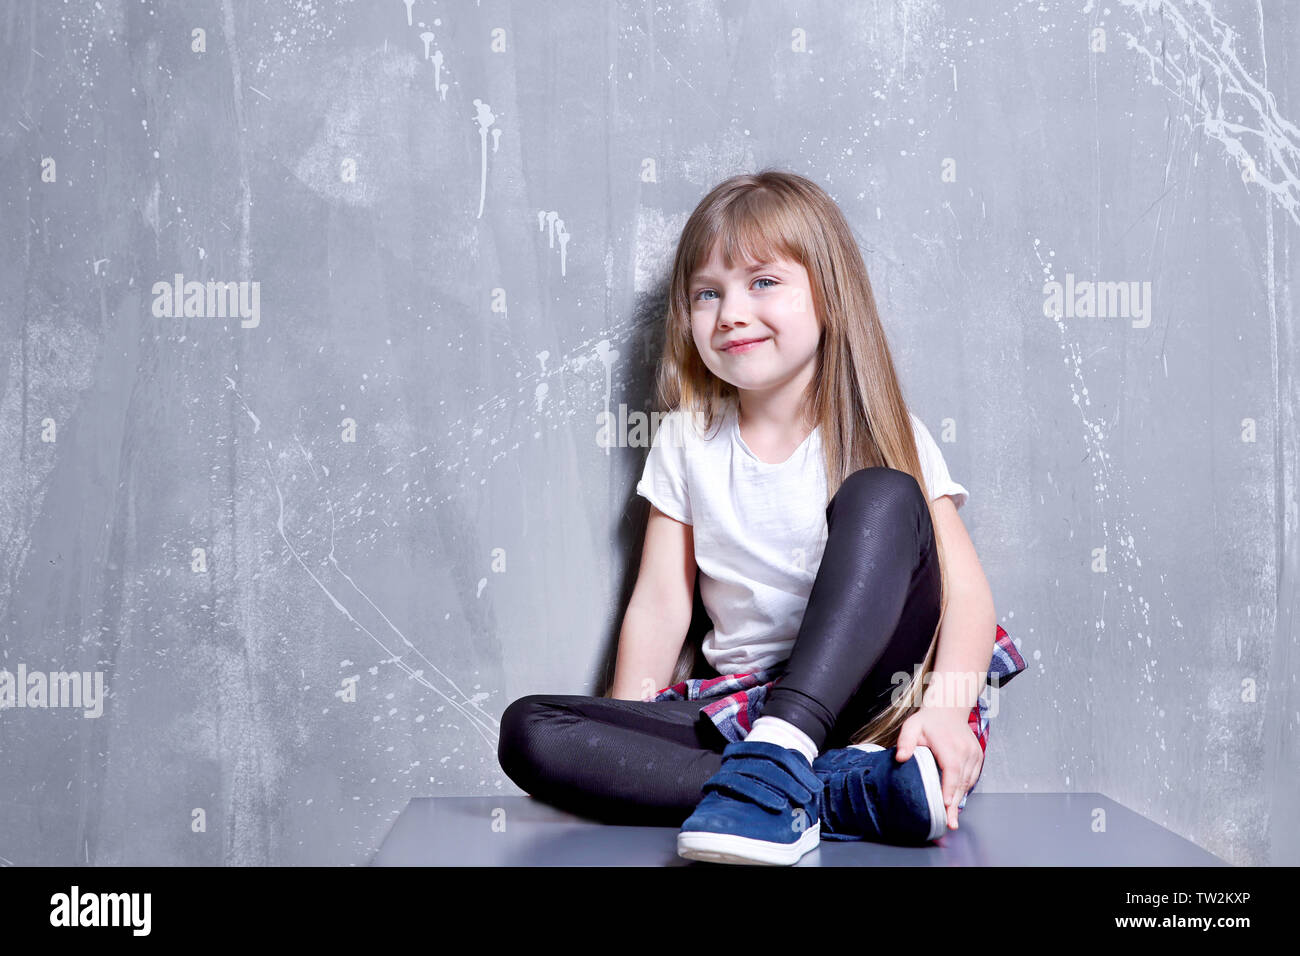 Cute Little Girl Sitting On Chest Of Drawers Against Textured Wall